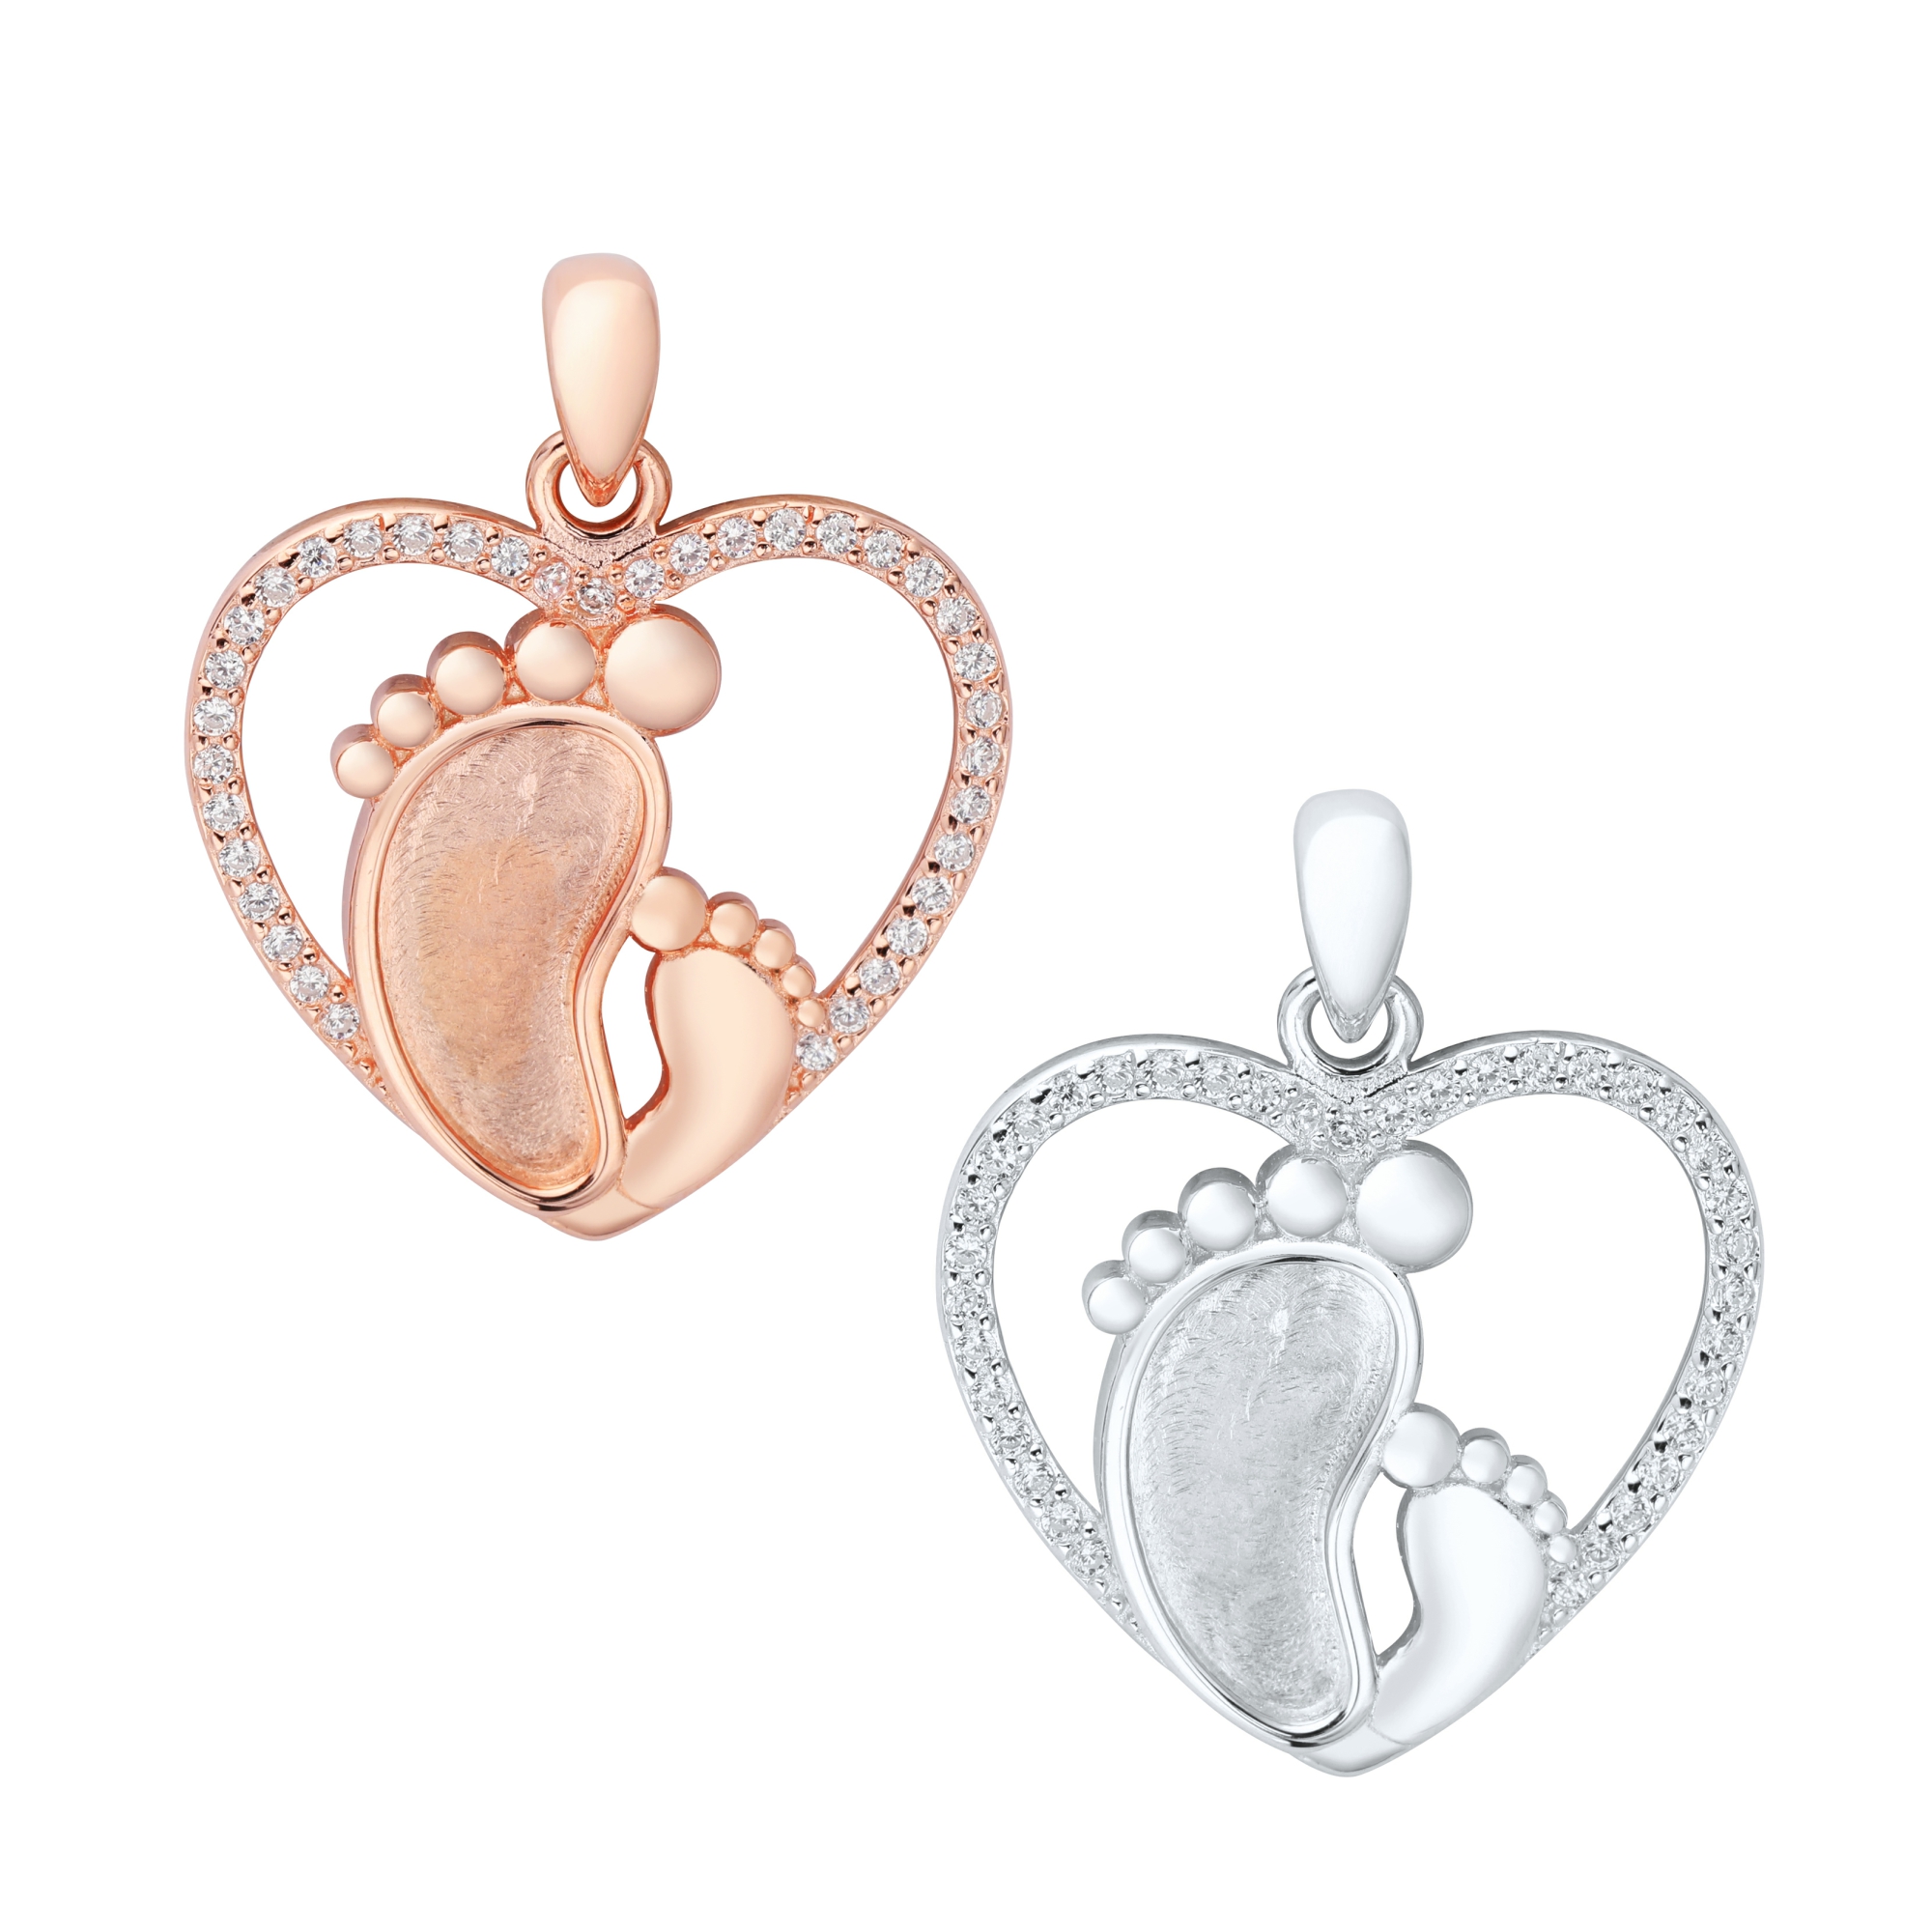 6x11MM Baby Footprint Keepsake Breast Milk Resin Pendant Bezel Settings,Solid 925 Sterling Silver Rose Gold Plated Pendant,DIY Memory Jewelry Supplies Overall Size 21MM 1431224 - Click Image to Close